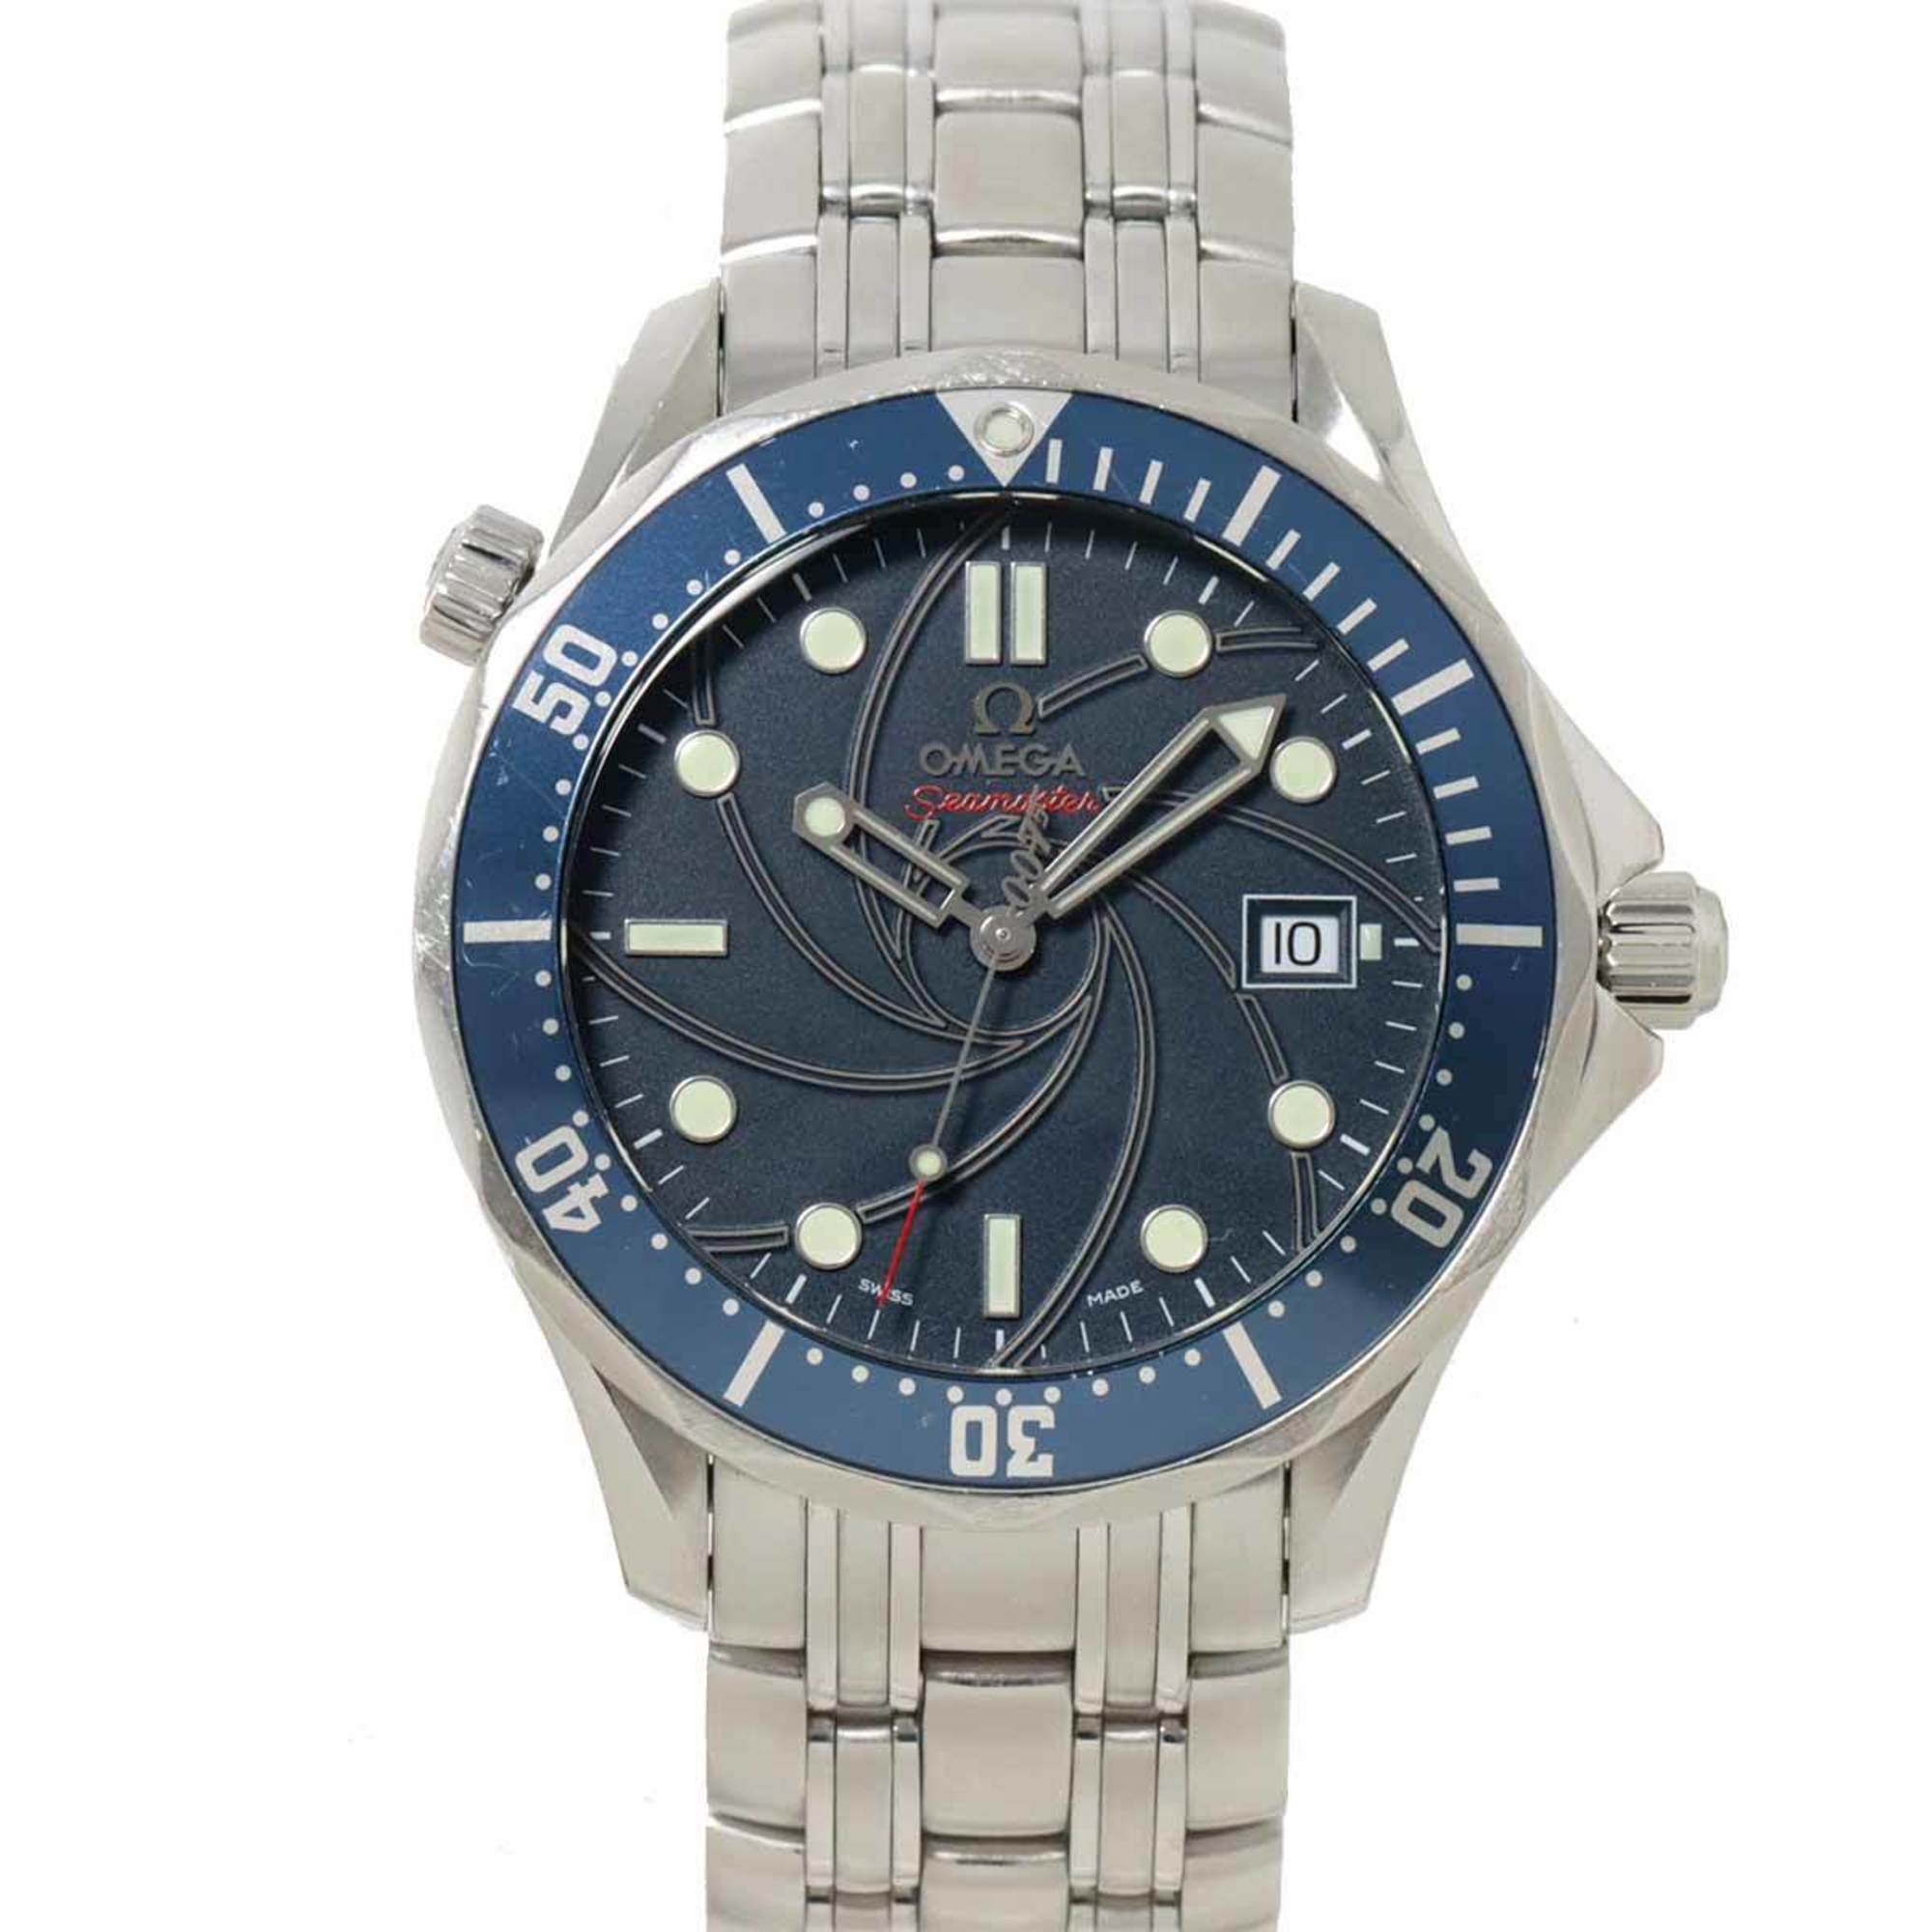 Omega OMEGA Seamaster Professional 2226 80 James Bond 007 World Limited 10007 Men's Watch Date Blue Dial Automatic